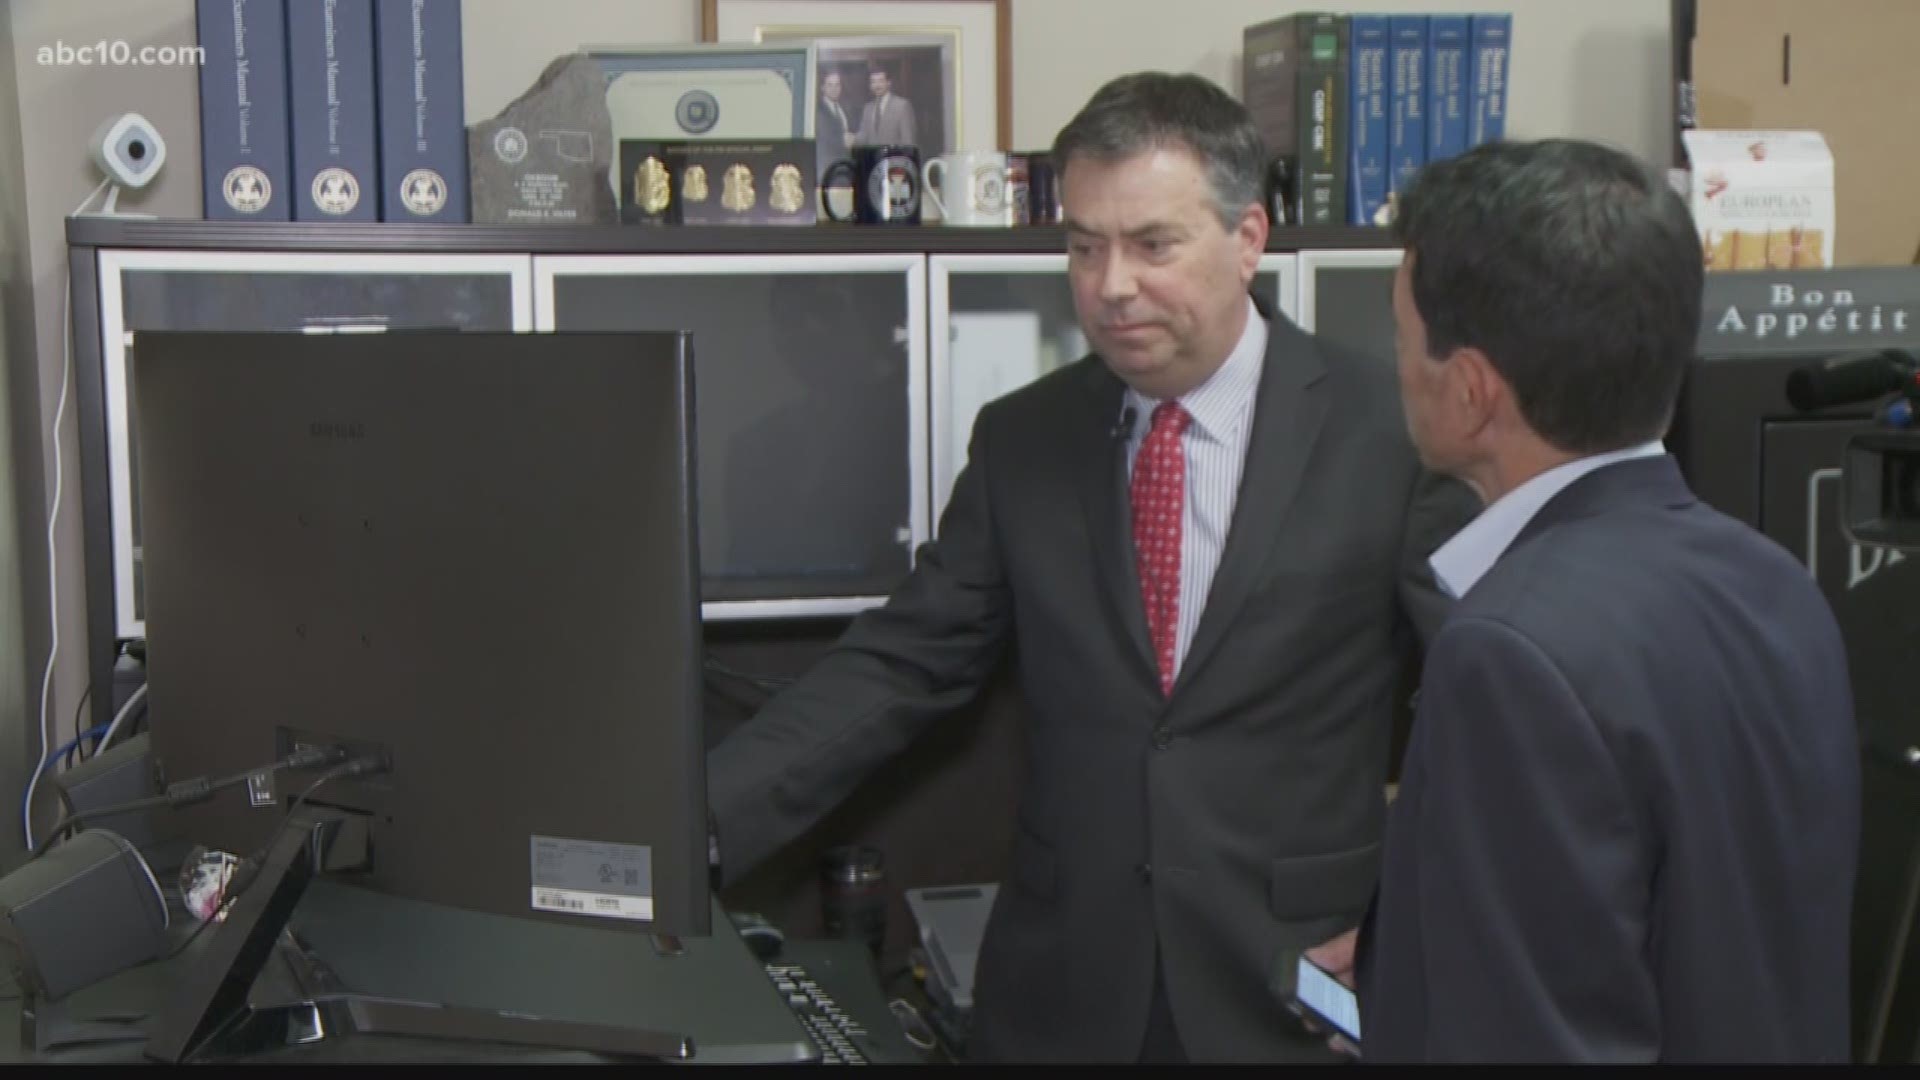 Now a computer forensics expert for the VAND Group in Roseville, the former officer also is an attorney who has taught the use of police deadly force to other FBI agents in Washington, D.C.